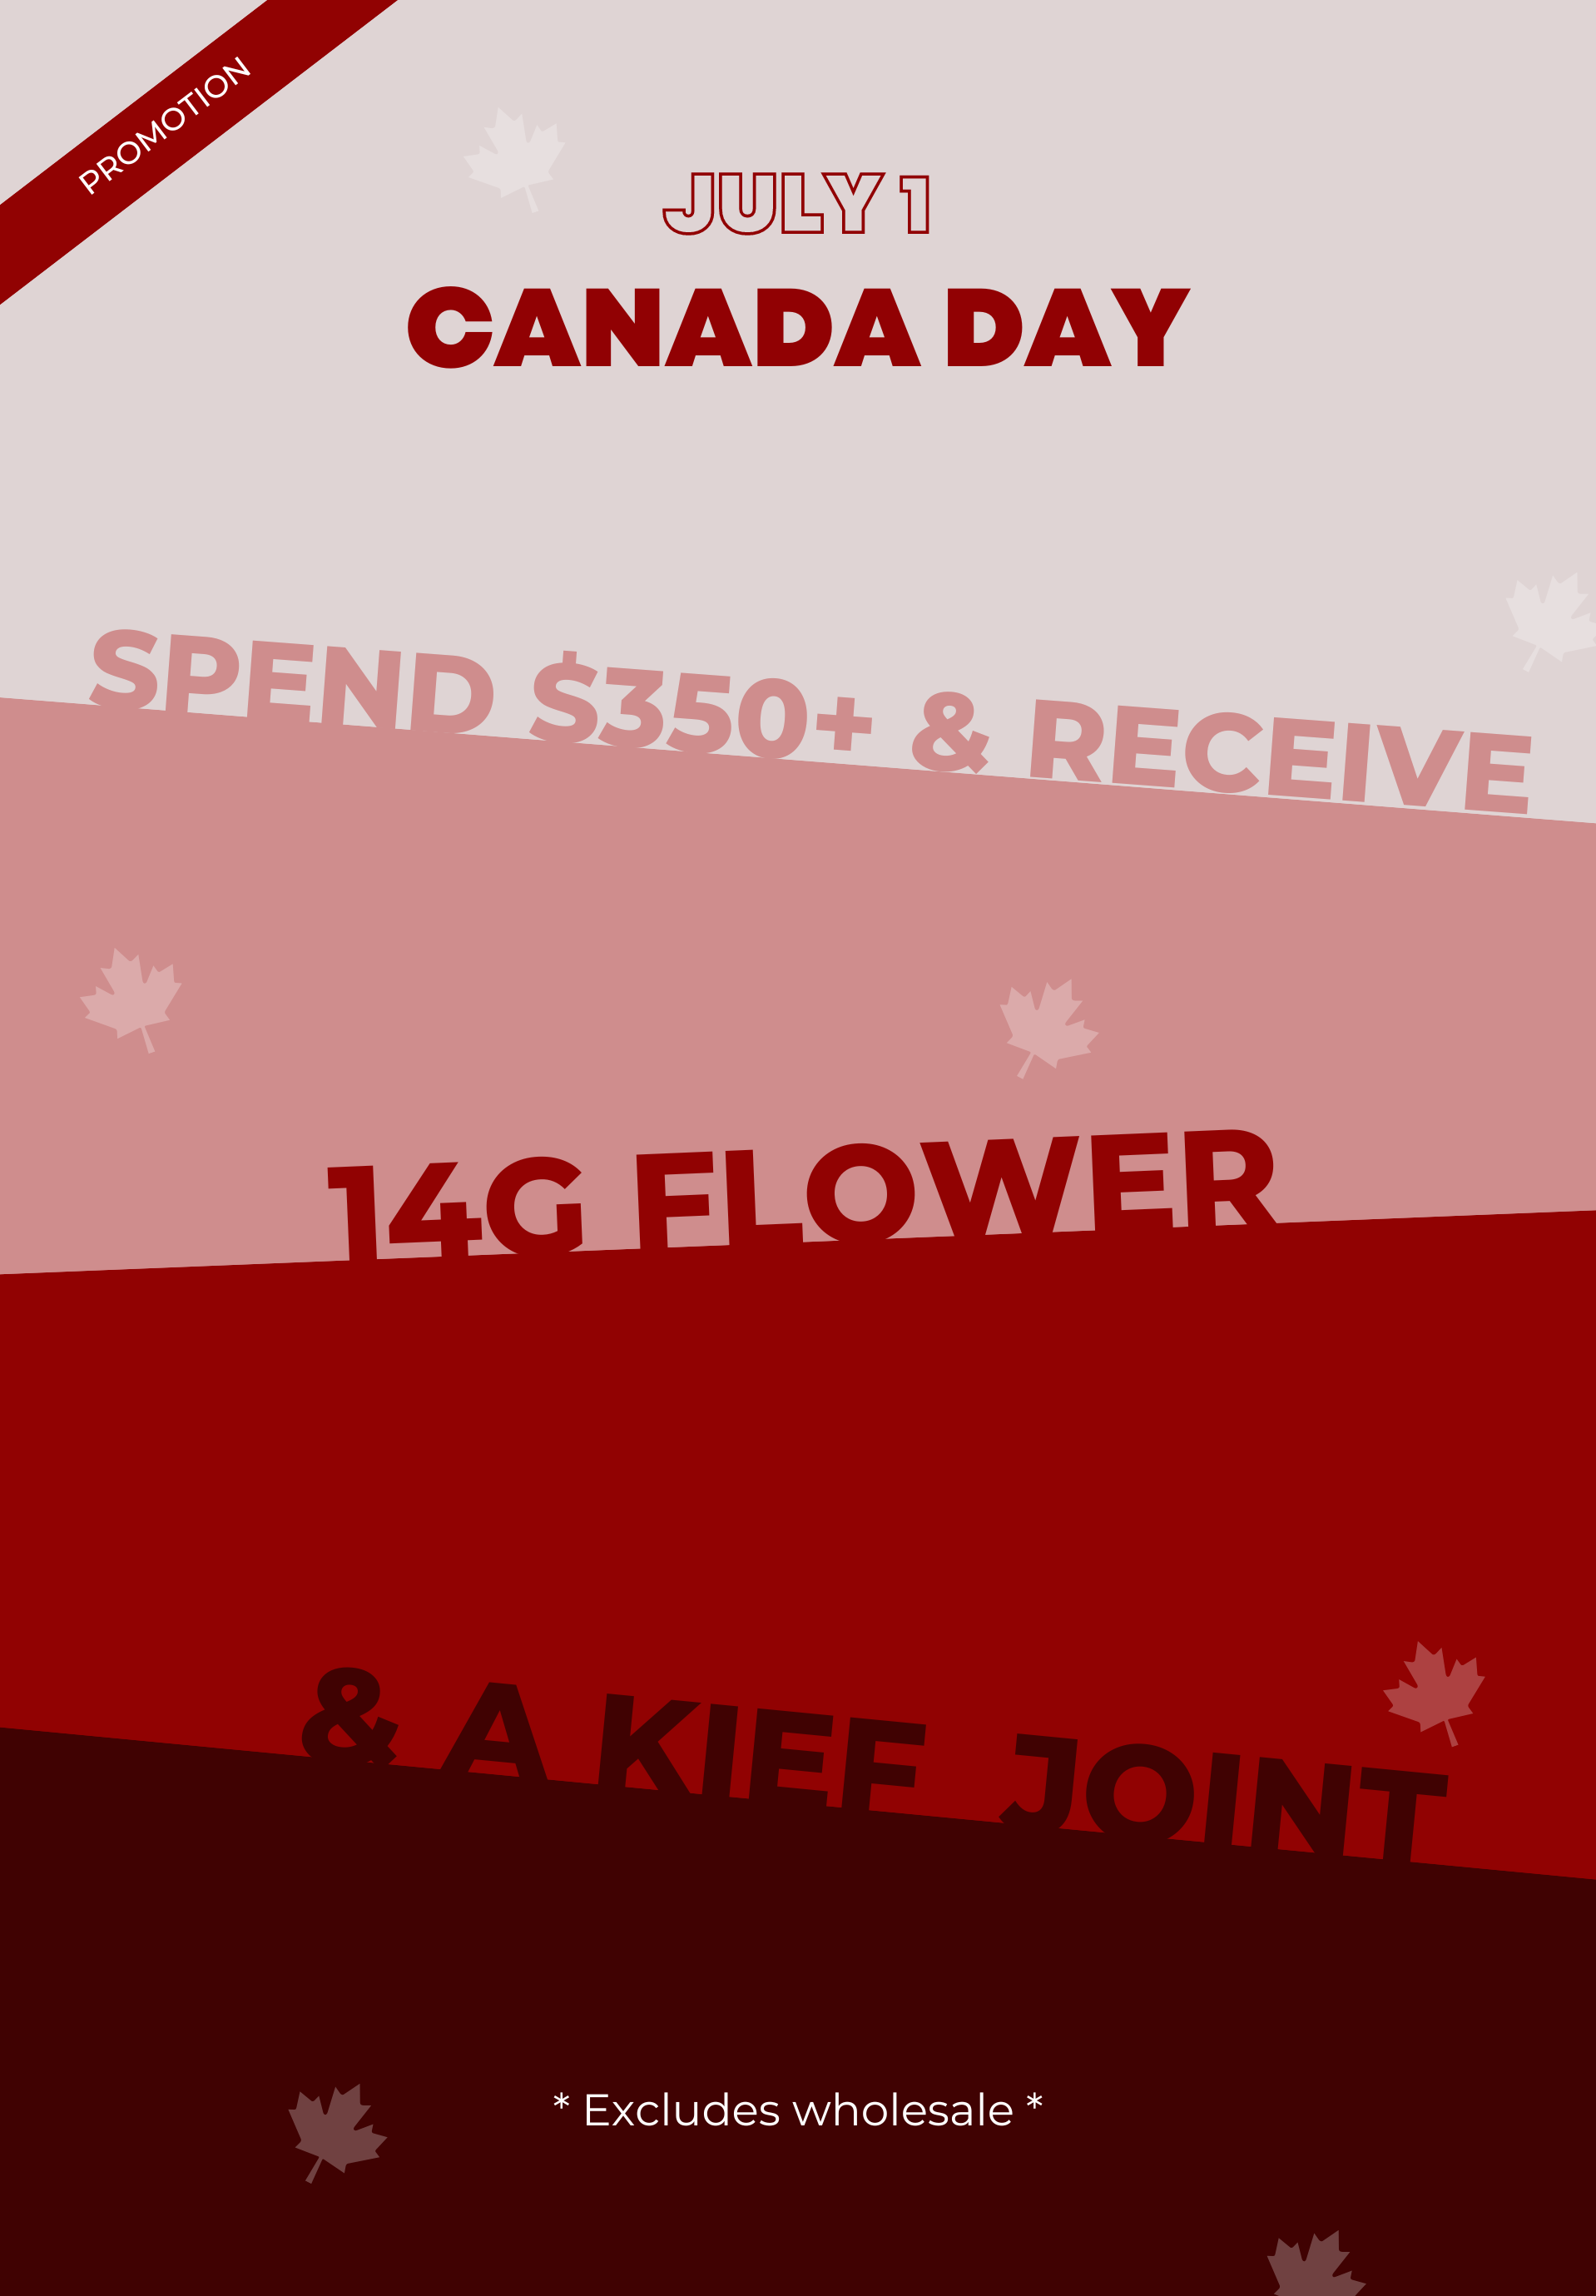 Canada Day Promotion.png